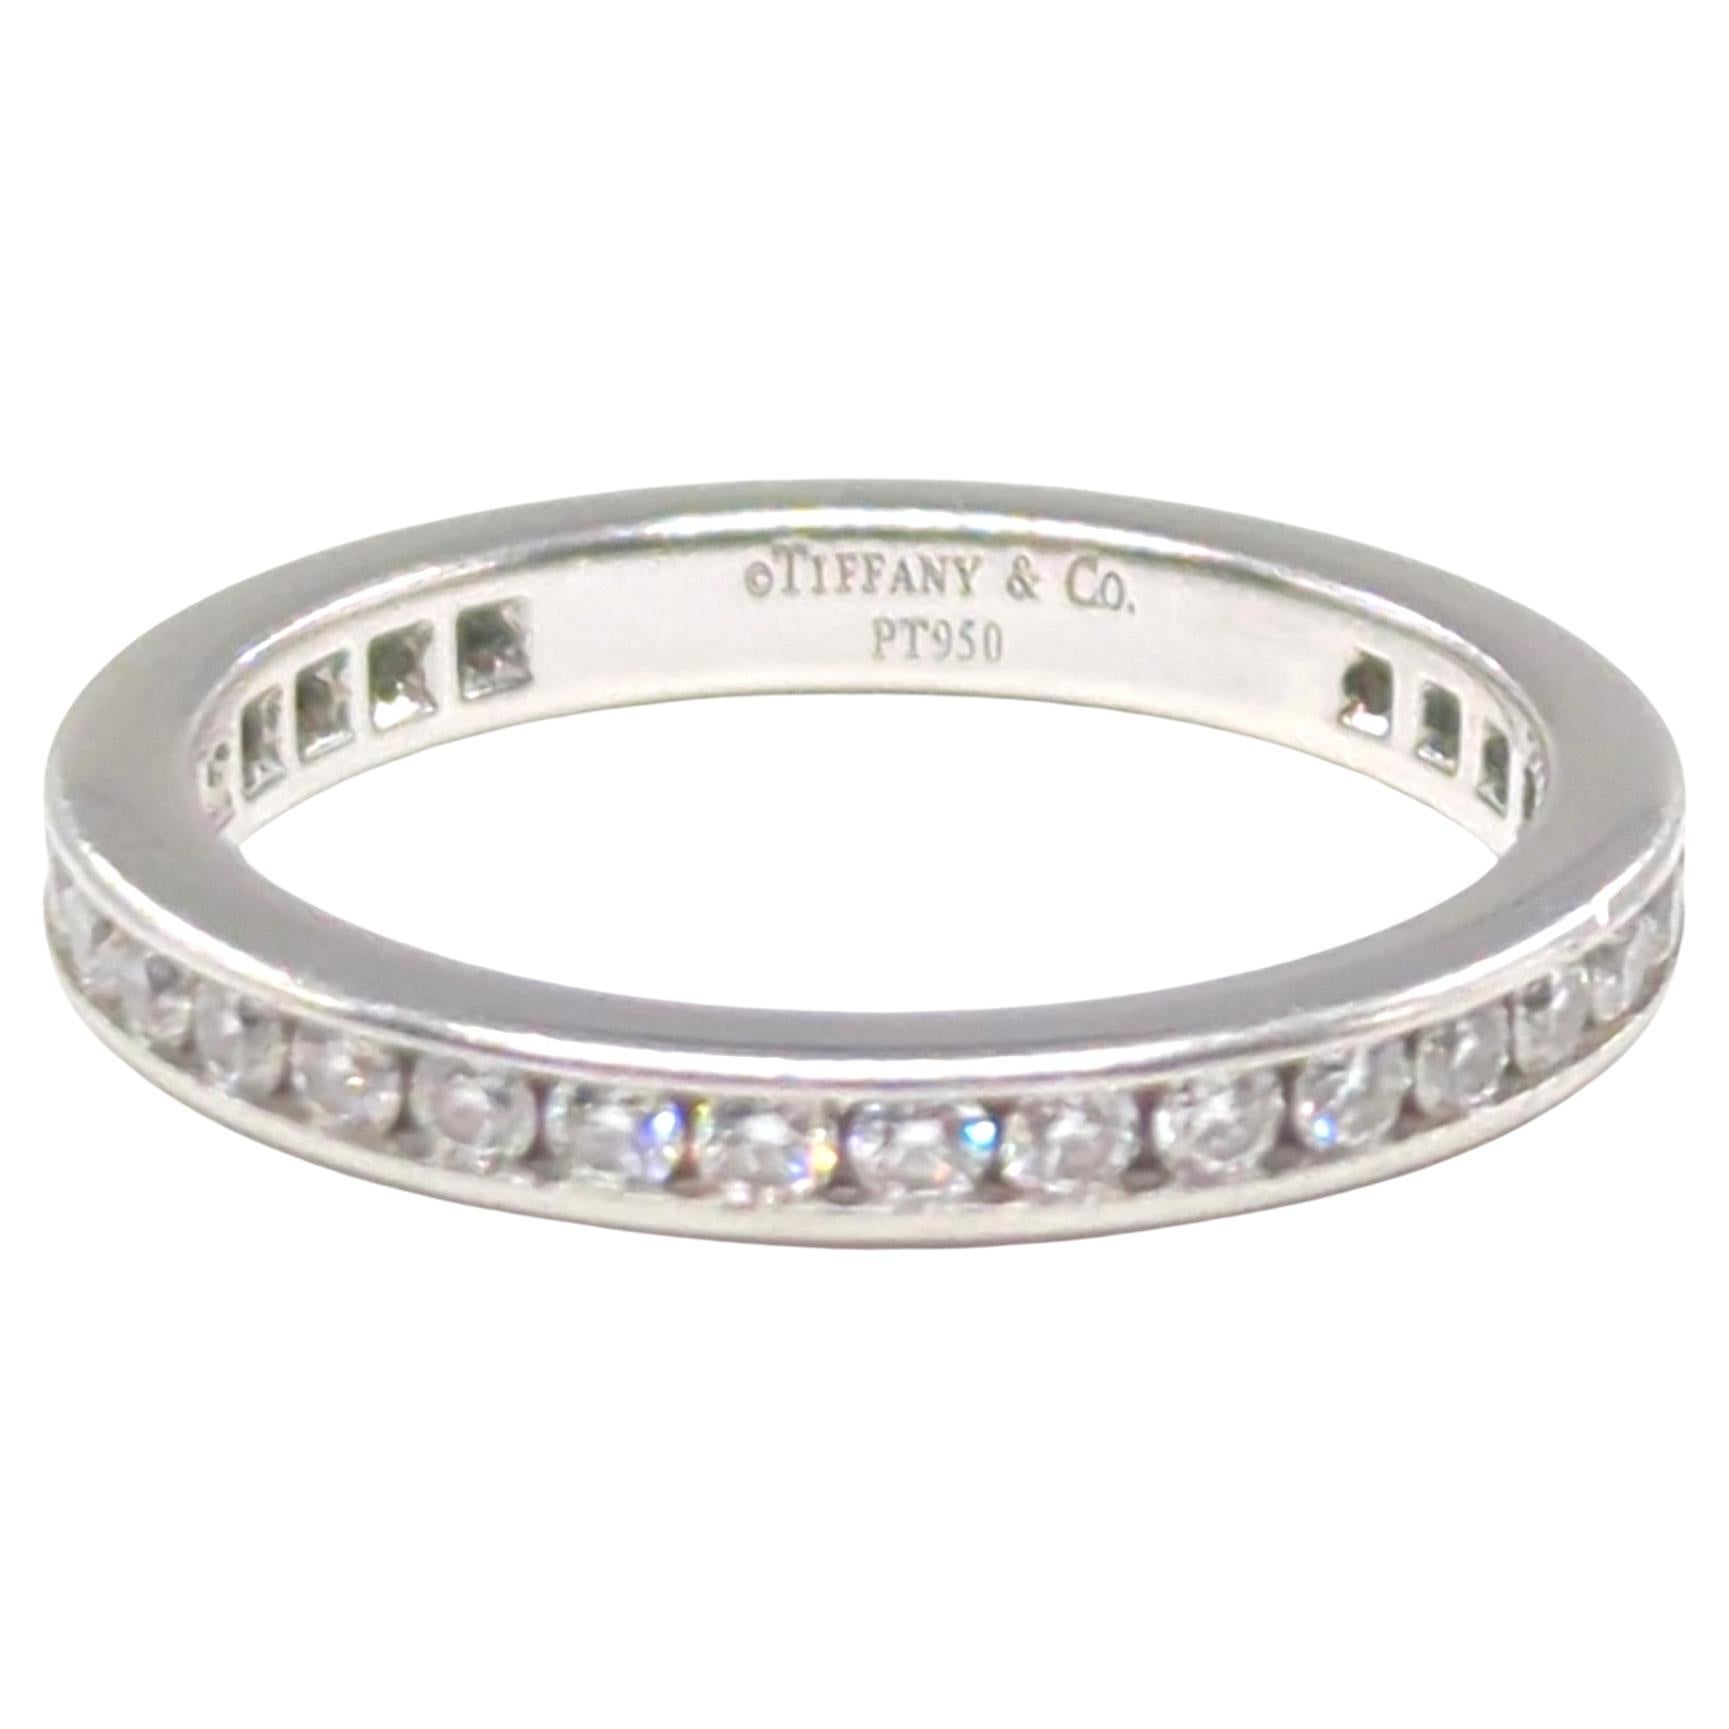 Tiffany & Co. original classic channel set full circle diamond eternity ring, 0.73 CTW 

2.6mm thick band, lots of fire and sparkle!

Hallmarks: Tiffany & Co. PT950

